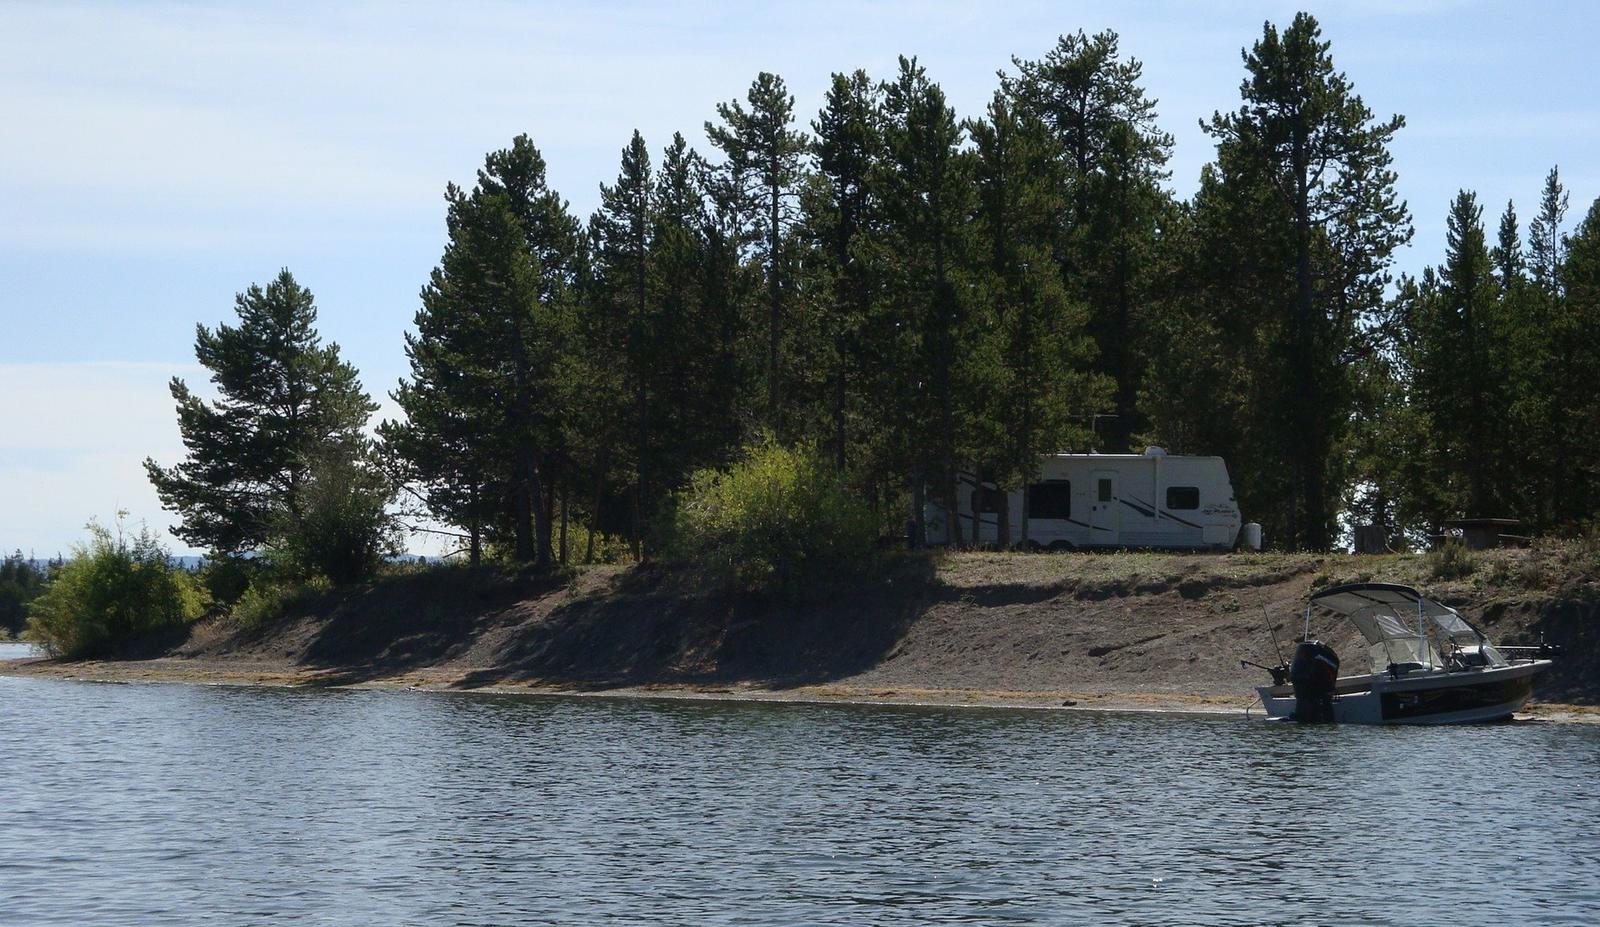 View from Hebgen Lake - Lake, boat and RV surrounded by pine treesLonesomehurst Campground